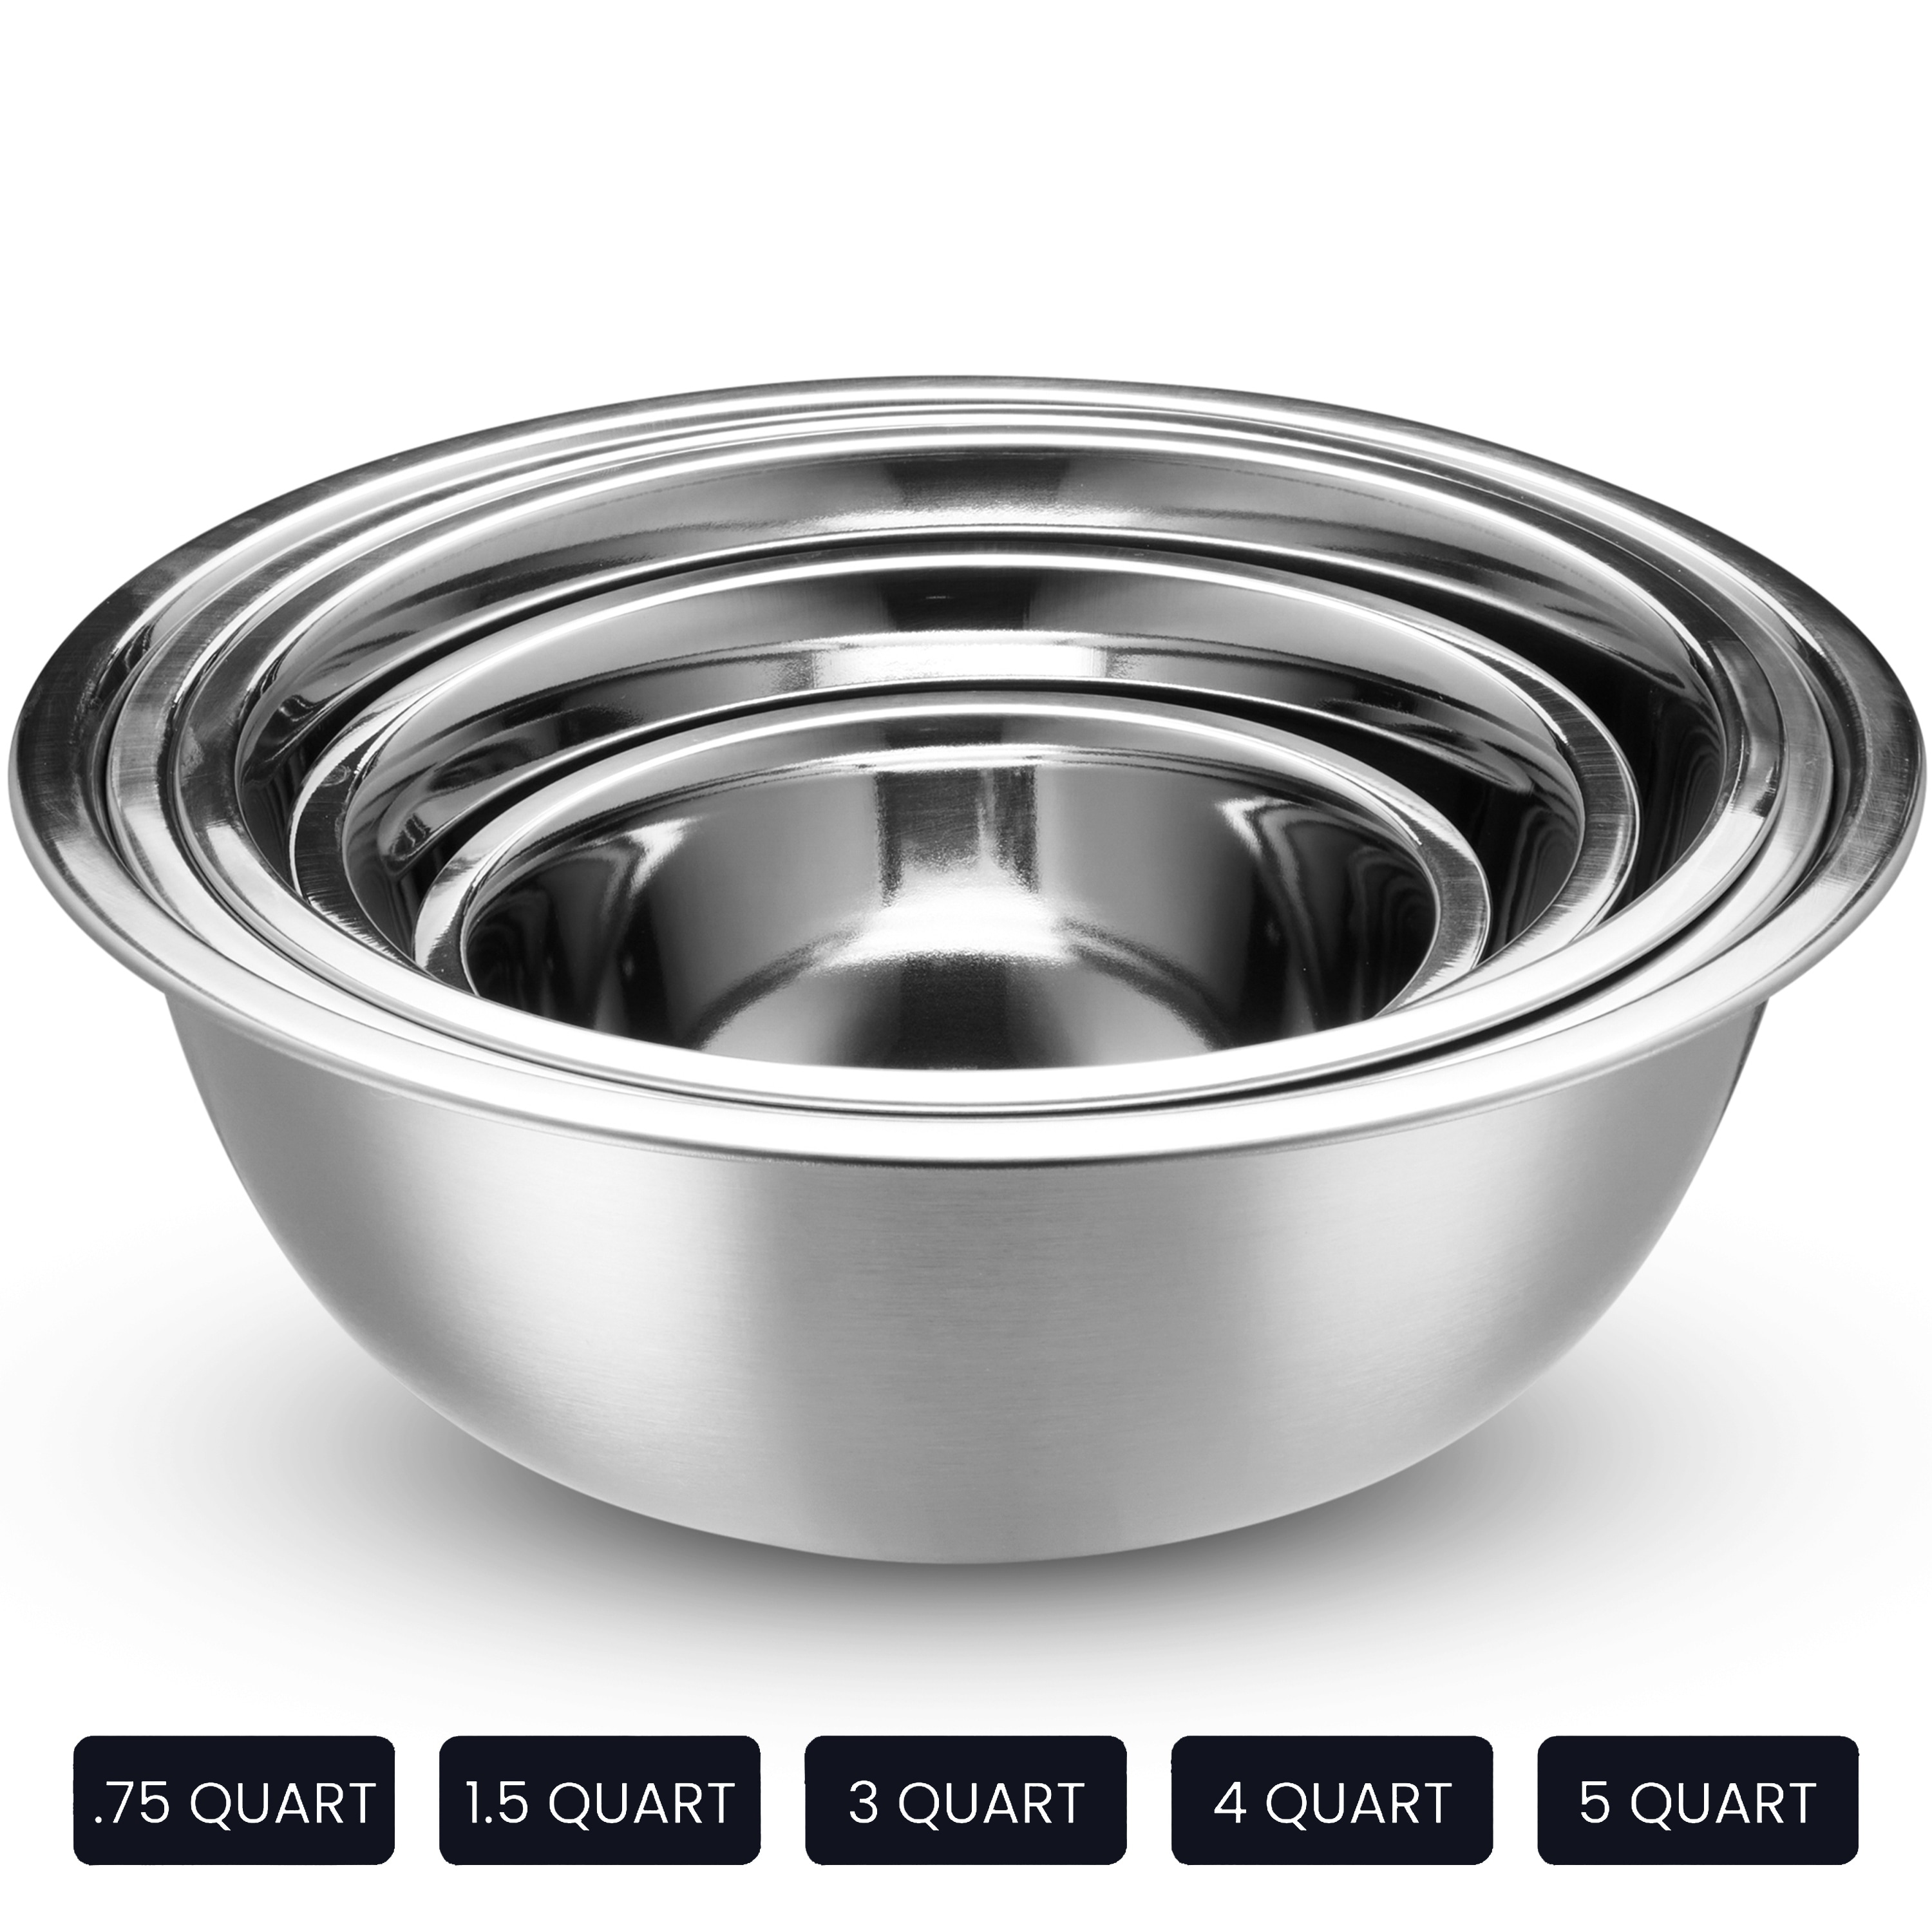 https://ak1.ostkcdn.com/images/products/is/images/direct/e6ae96fc6b915ff807fe5ea7bca6c7578c0bfffd/Heavy-Duty-Meal-Prep-Stainless-Steel-Mixing-Bowls-Set-with-Lids.jpg